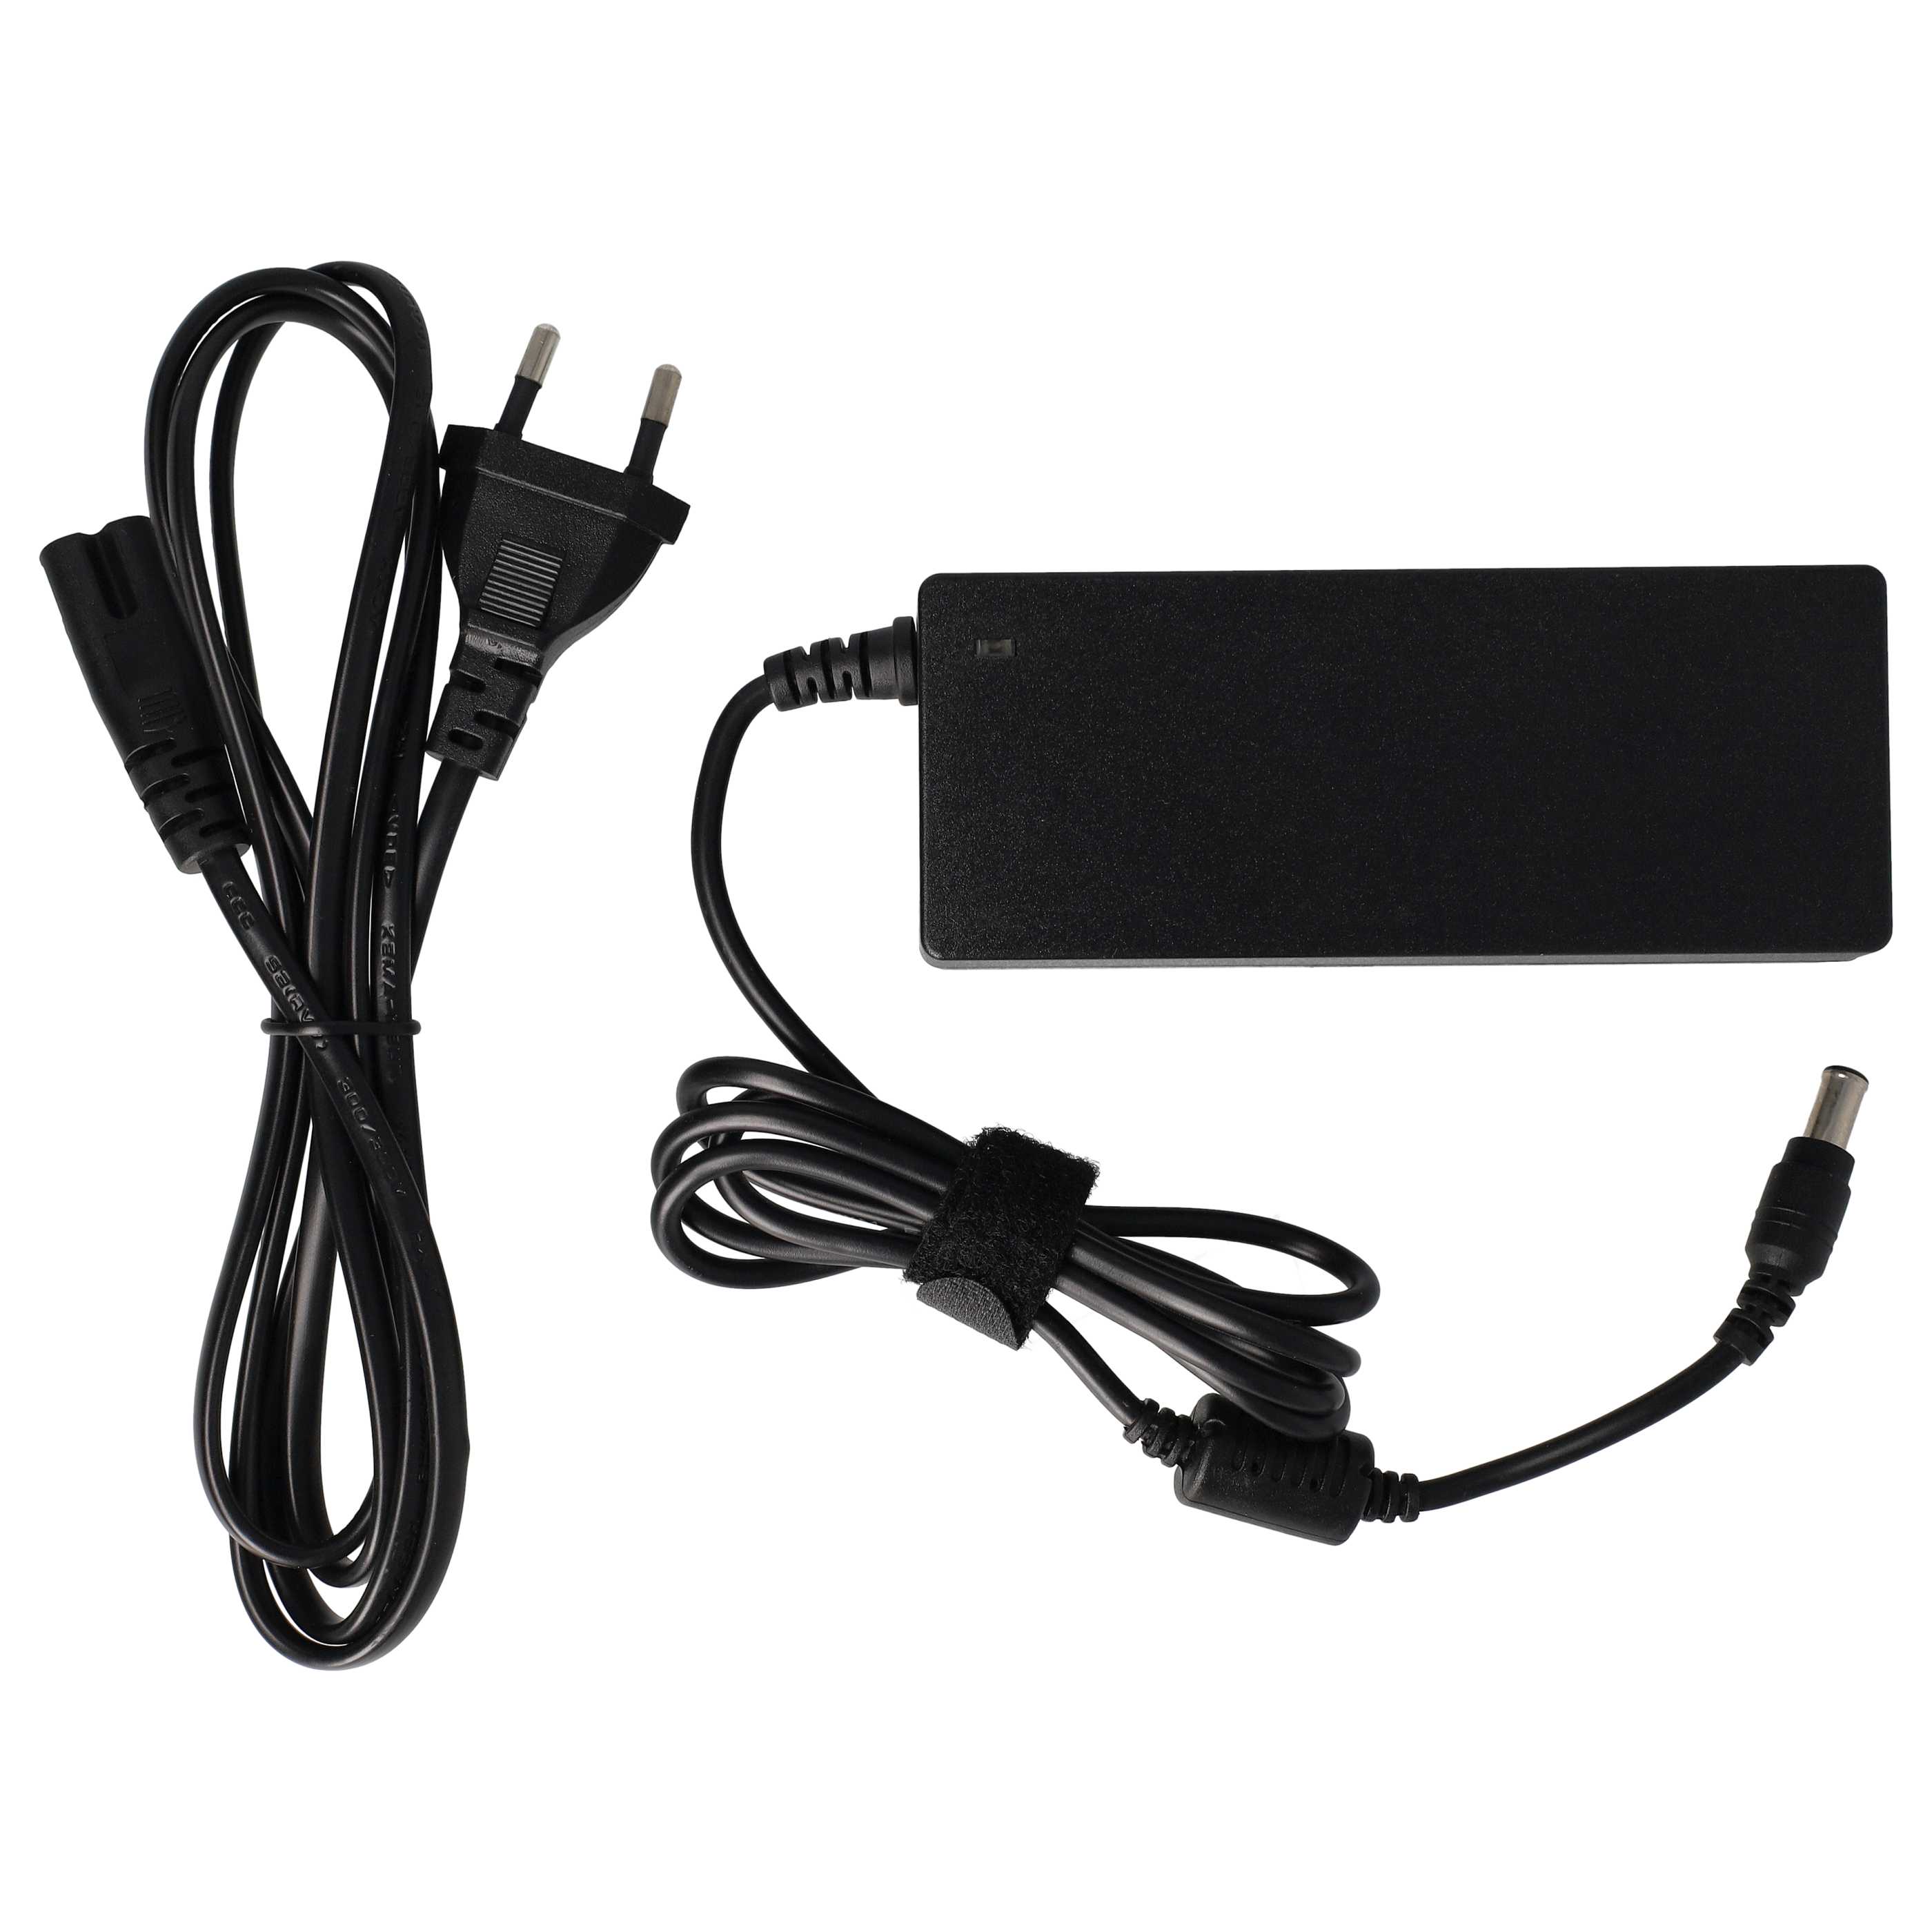 Mains Power Adapter replaces Sony PCGA-AC19V, PCGA-AC19V1, PCGA-AC19V10, PCGA-AC19V2 for SonyNotebook, 91 W